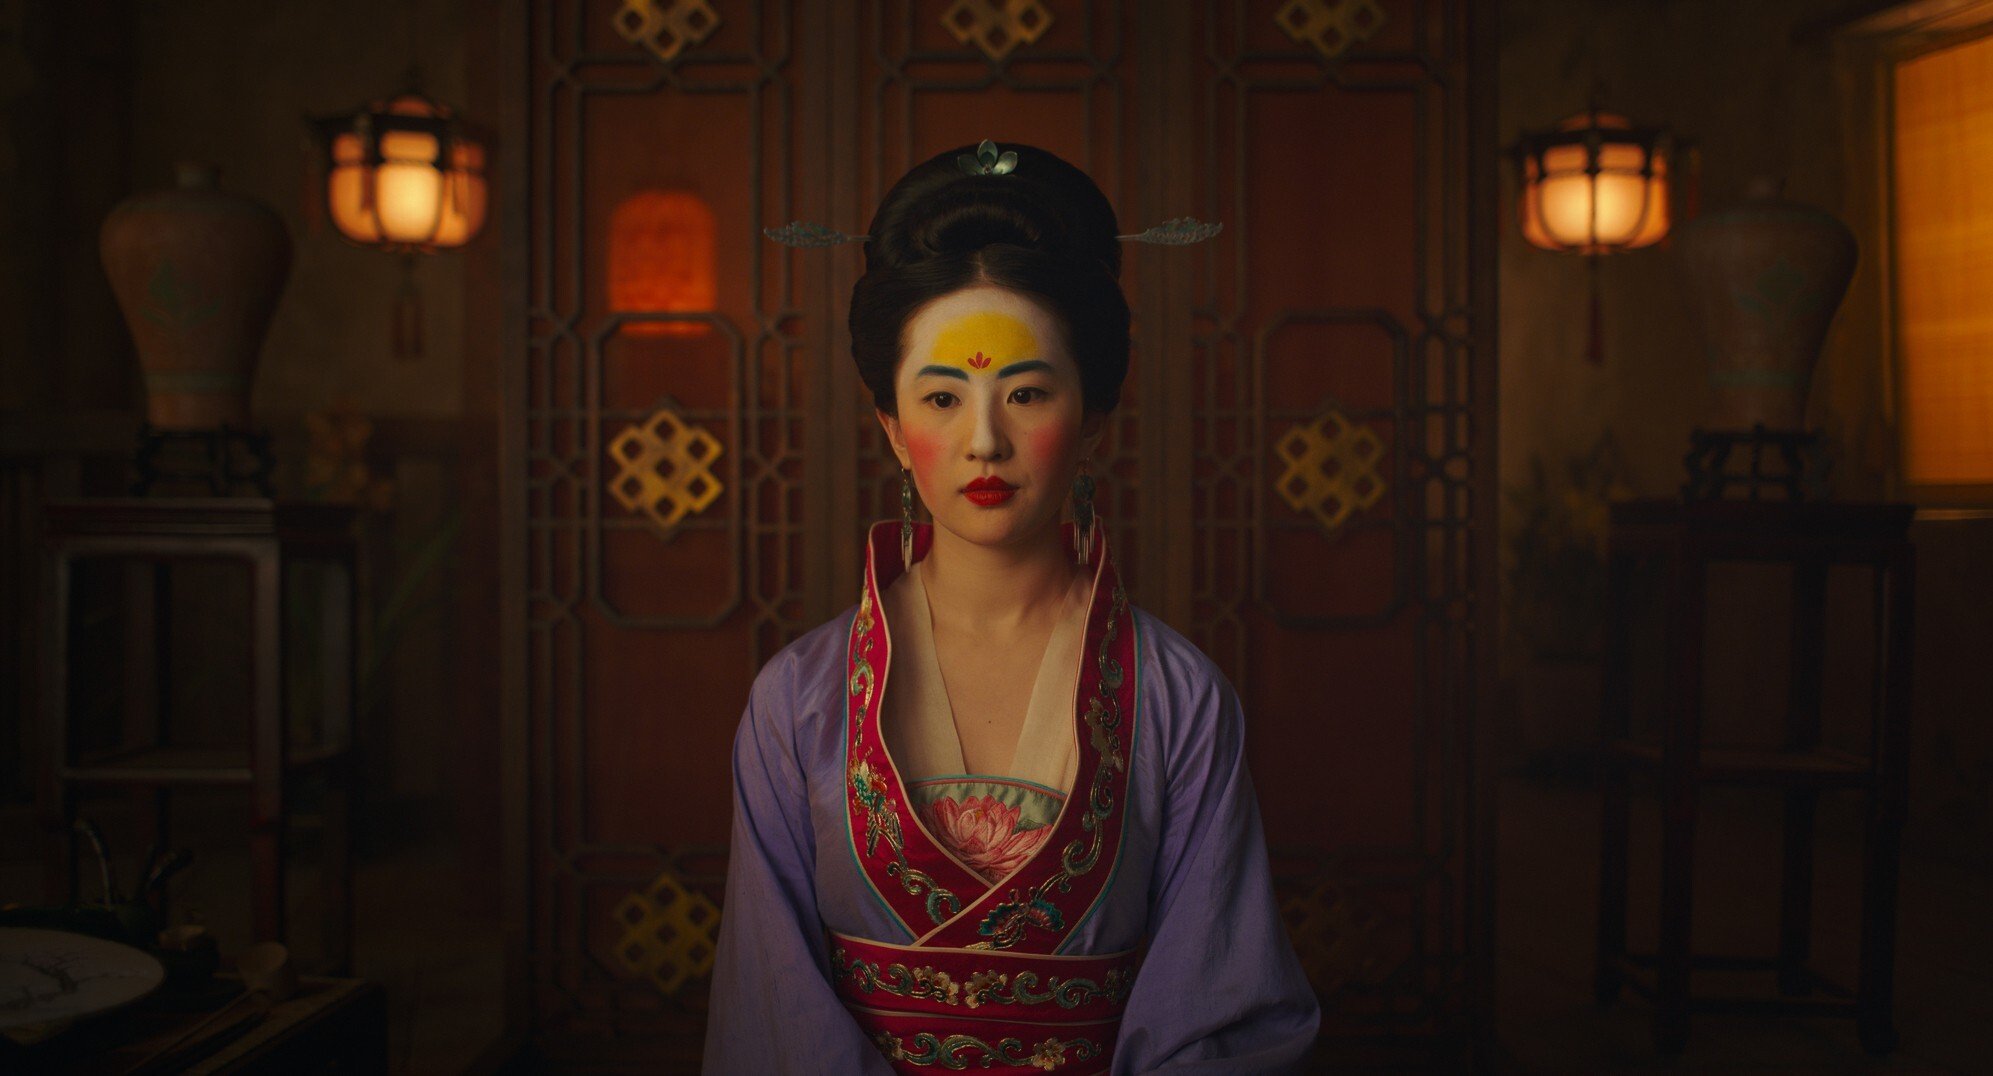 Liu Yifei in the title role of Mulan in Disney’s Chinese-themed film. Photo: Disney Enterprises/AP